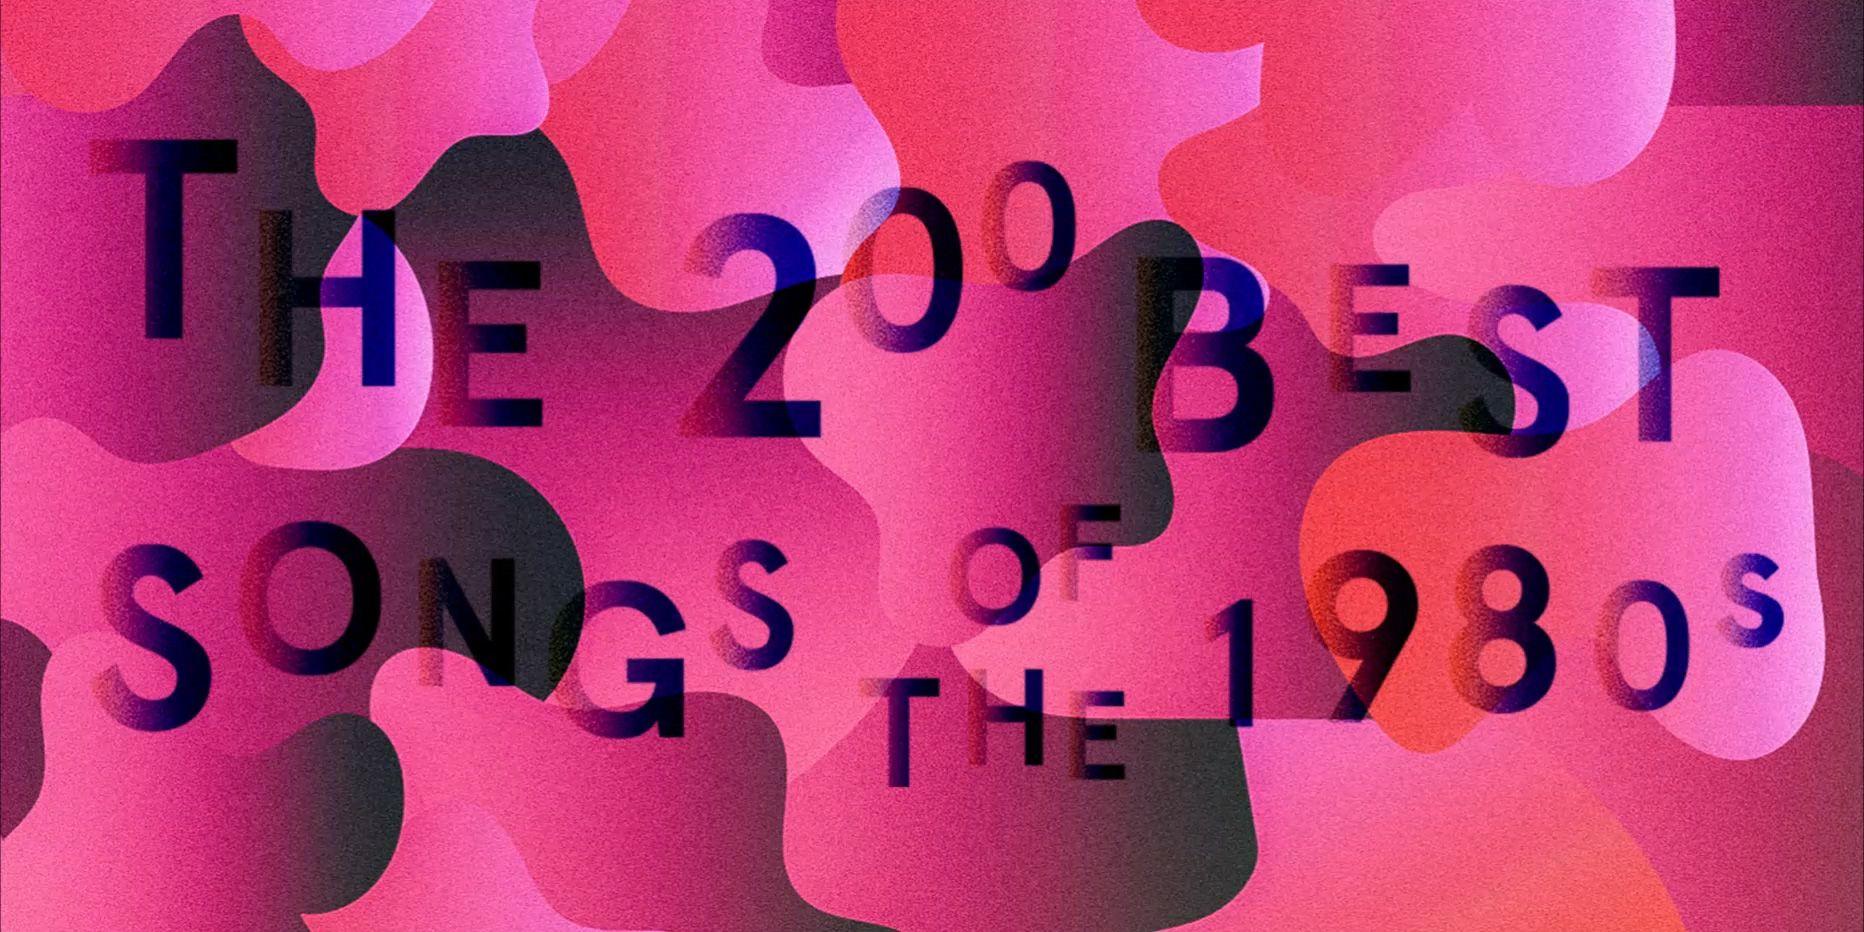 The 200 Best Songs of the 1980s